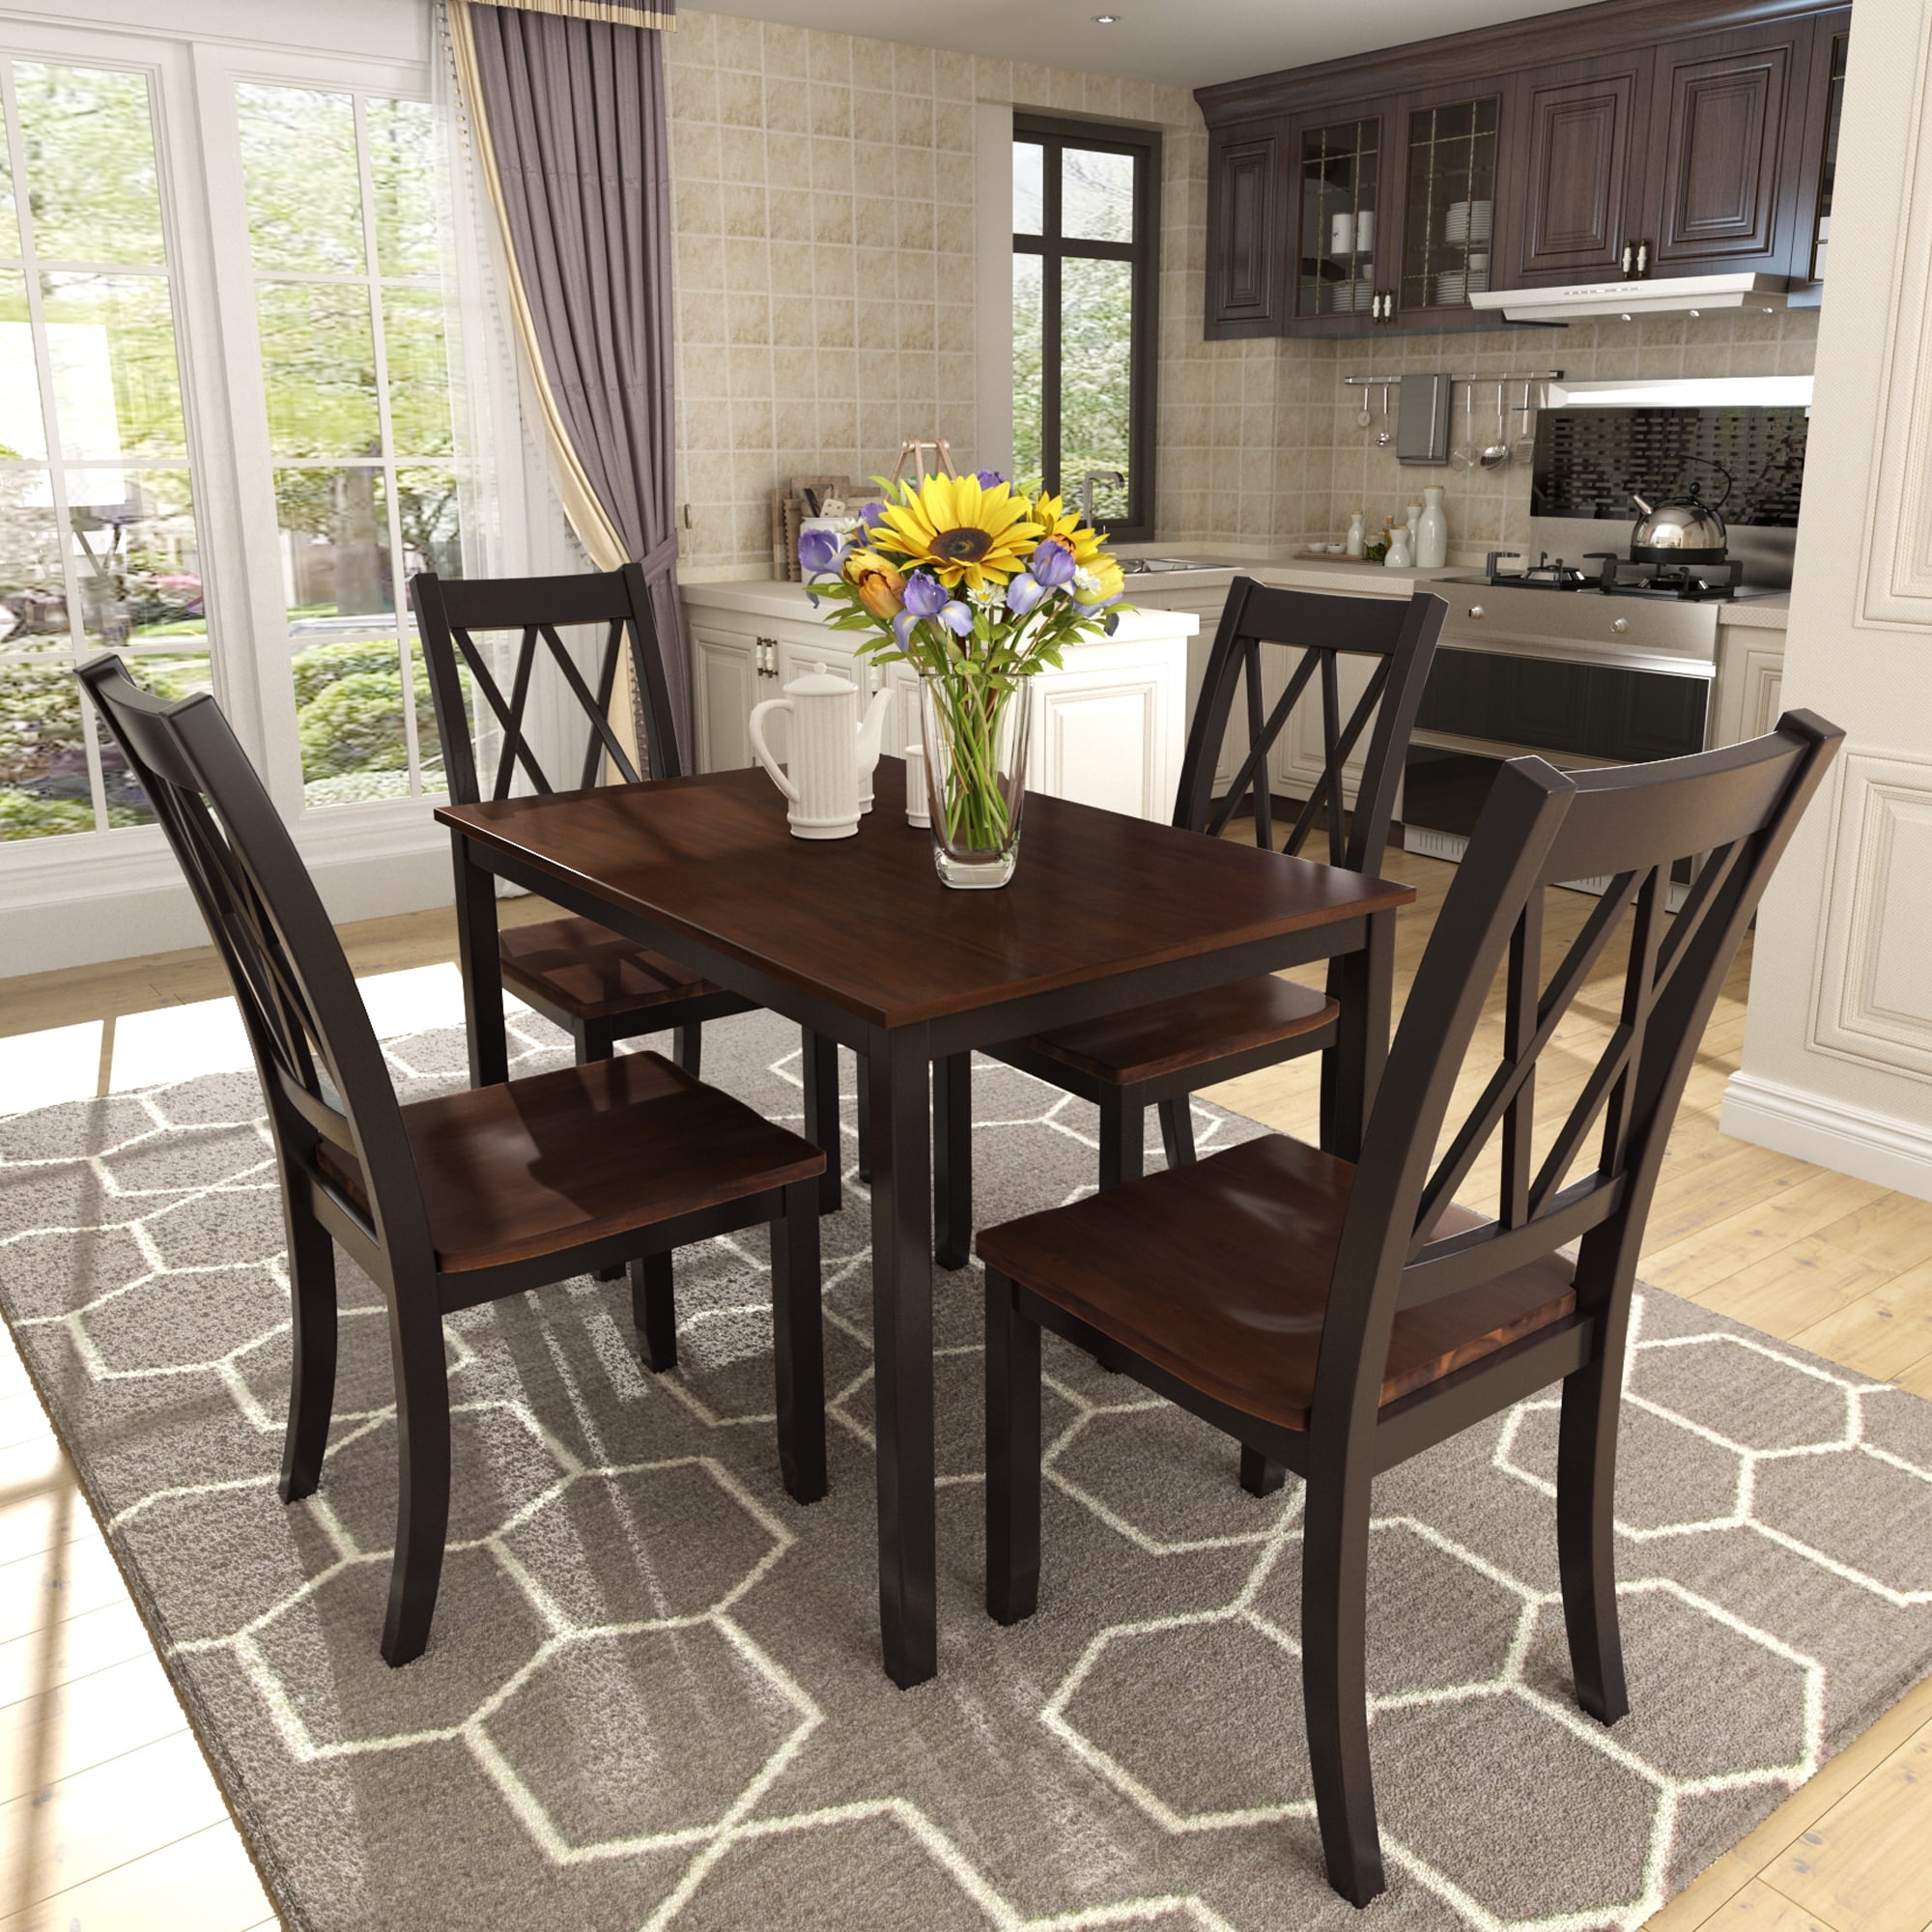 Clearance Dining Table Set With 4 Chairs